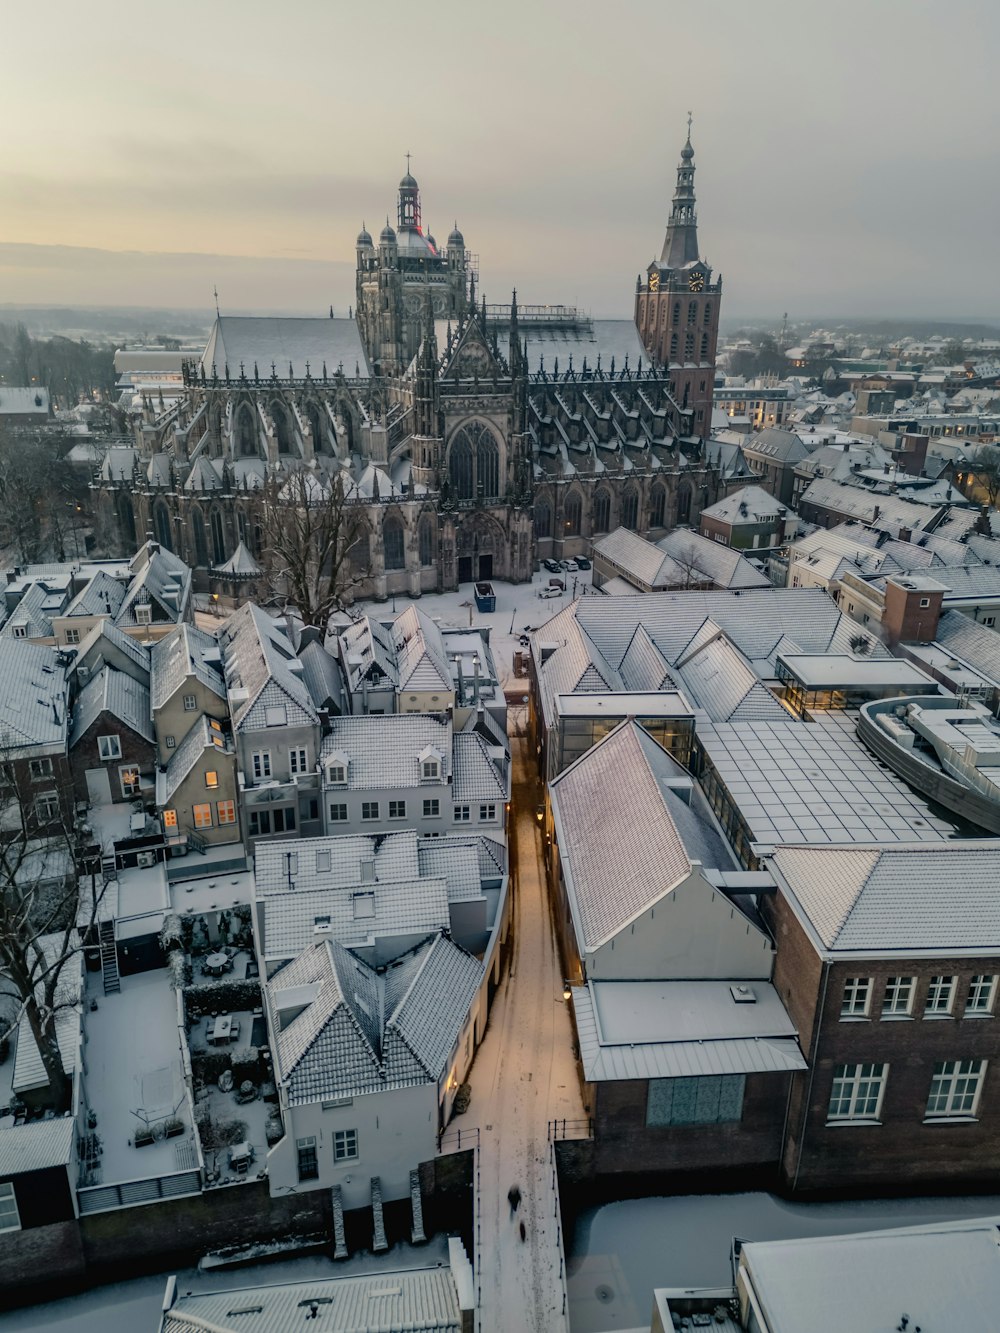 an aerial view of a city in winter